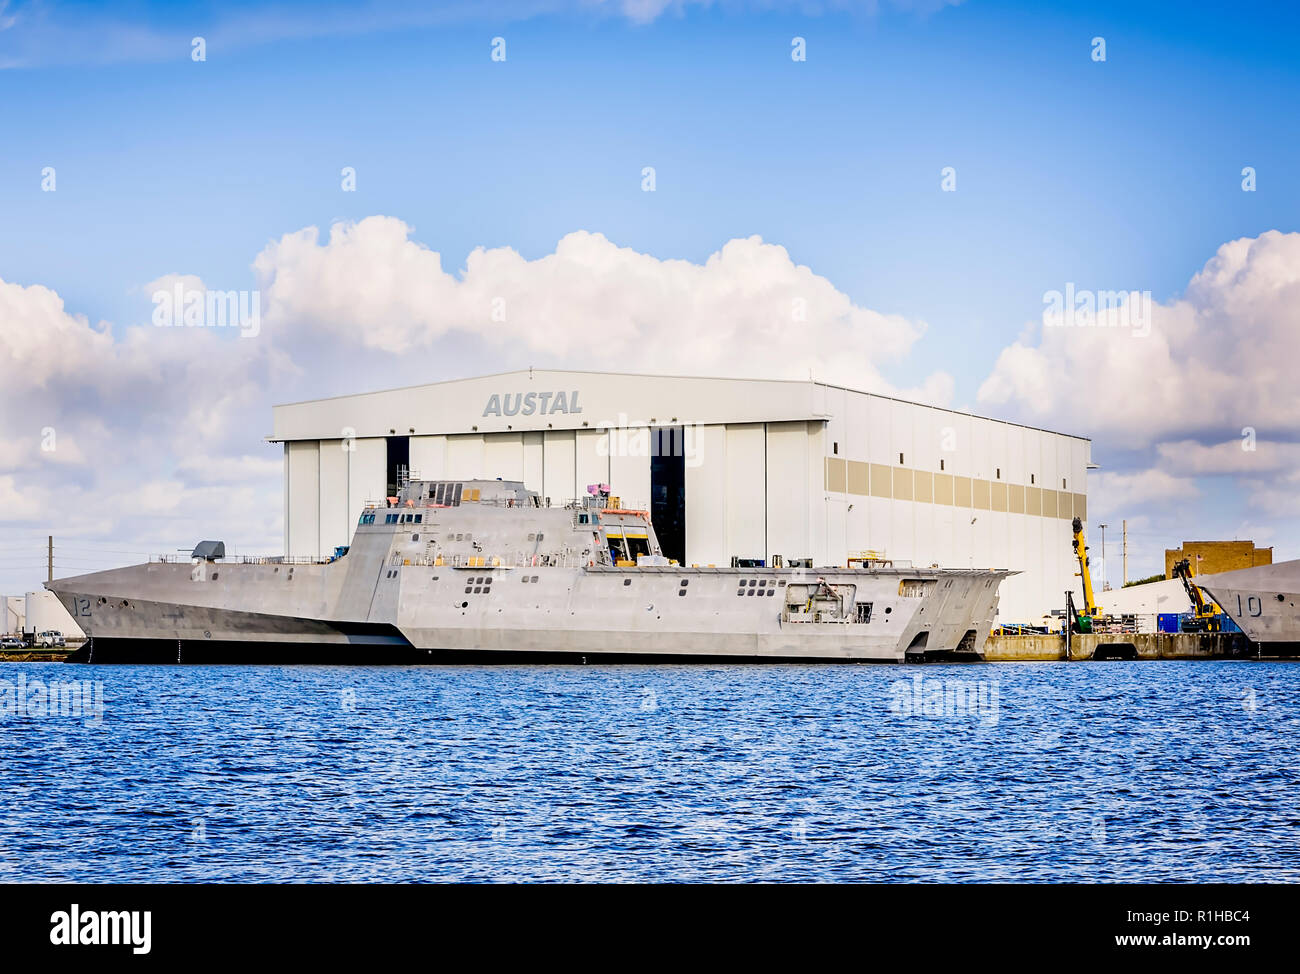 The USS Omaha (LCS 12), the nation's 12th littoral combat ship, is docked at Austal USA's ship manufacturing facility, in Mobile, Alabama. Stock Photo